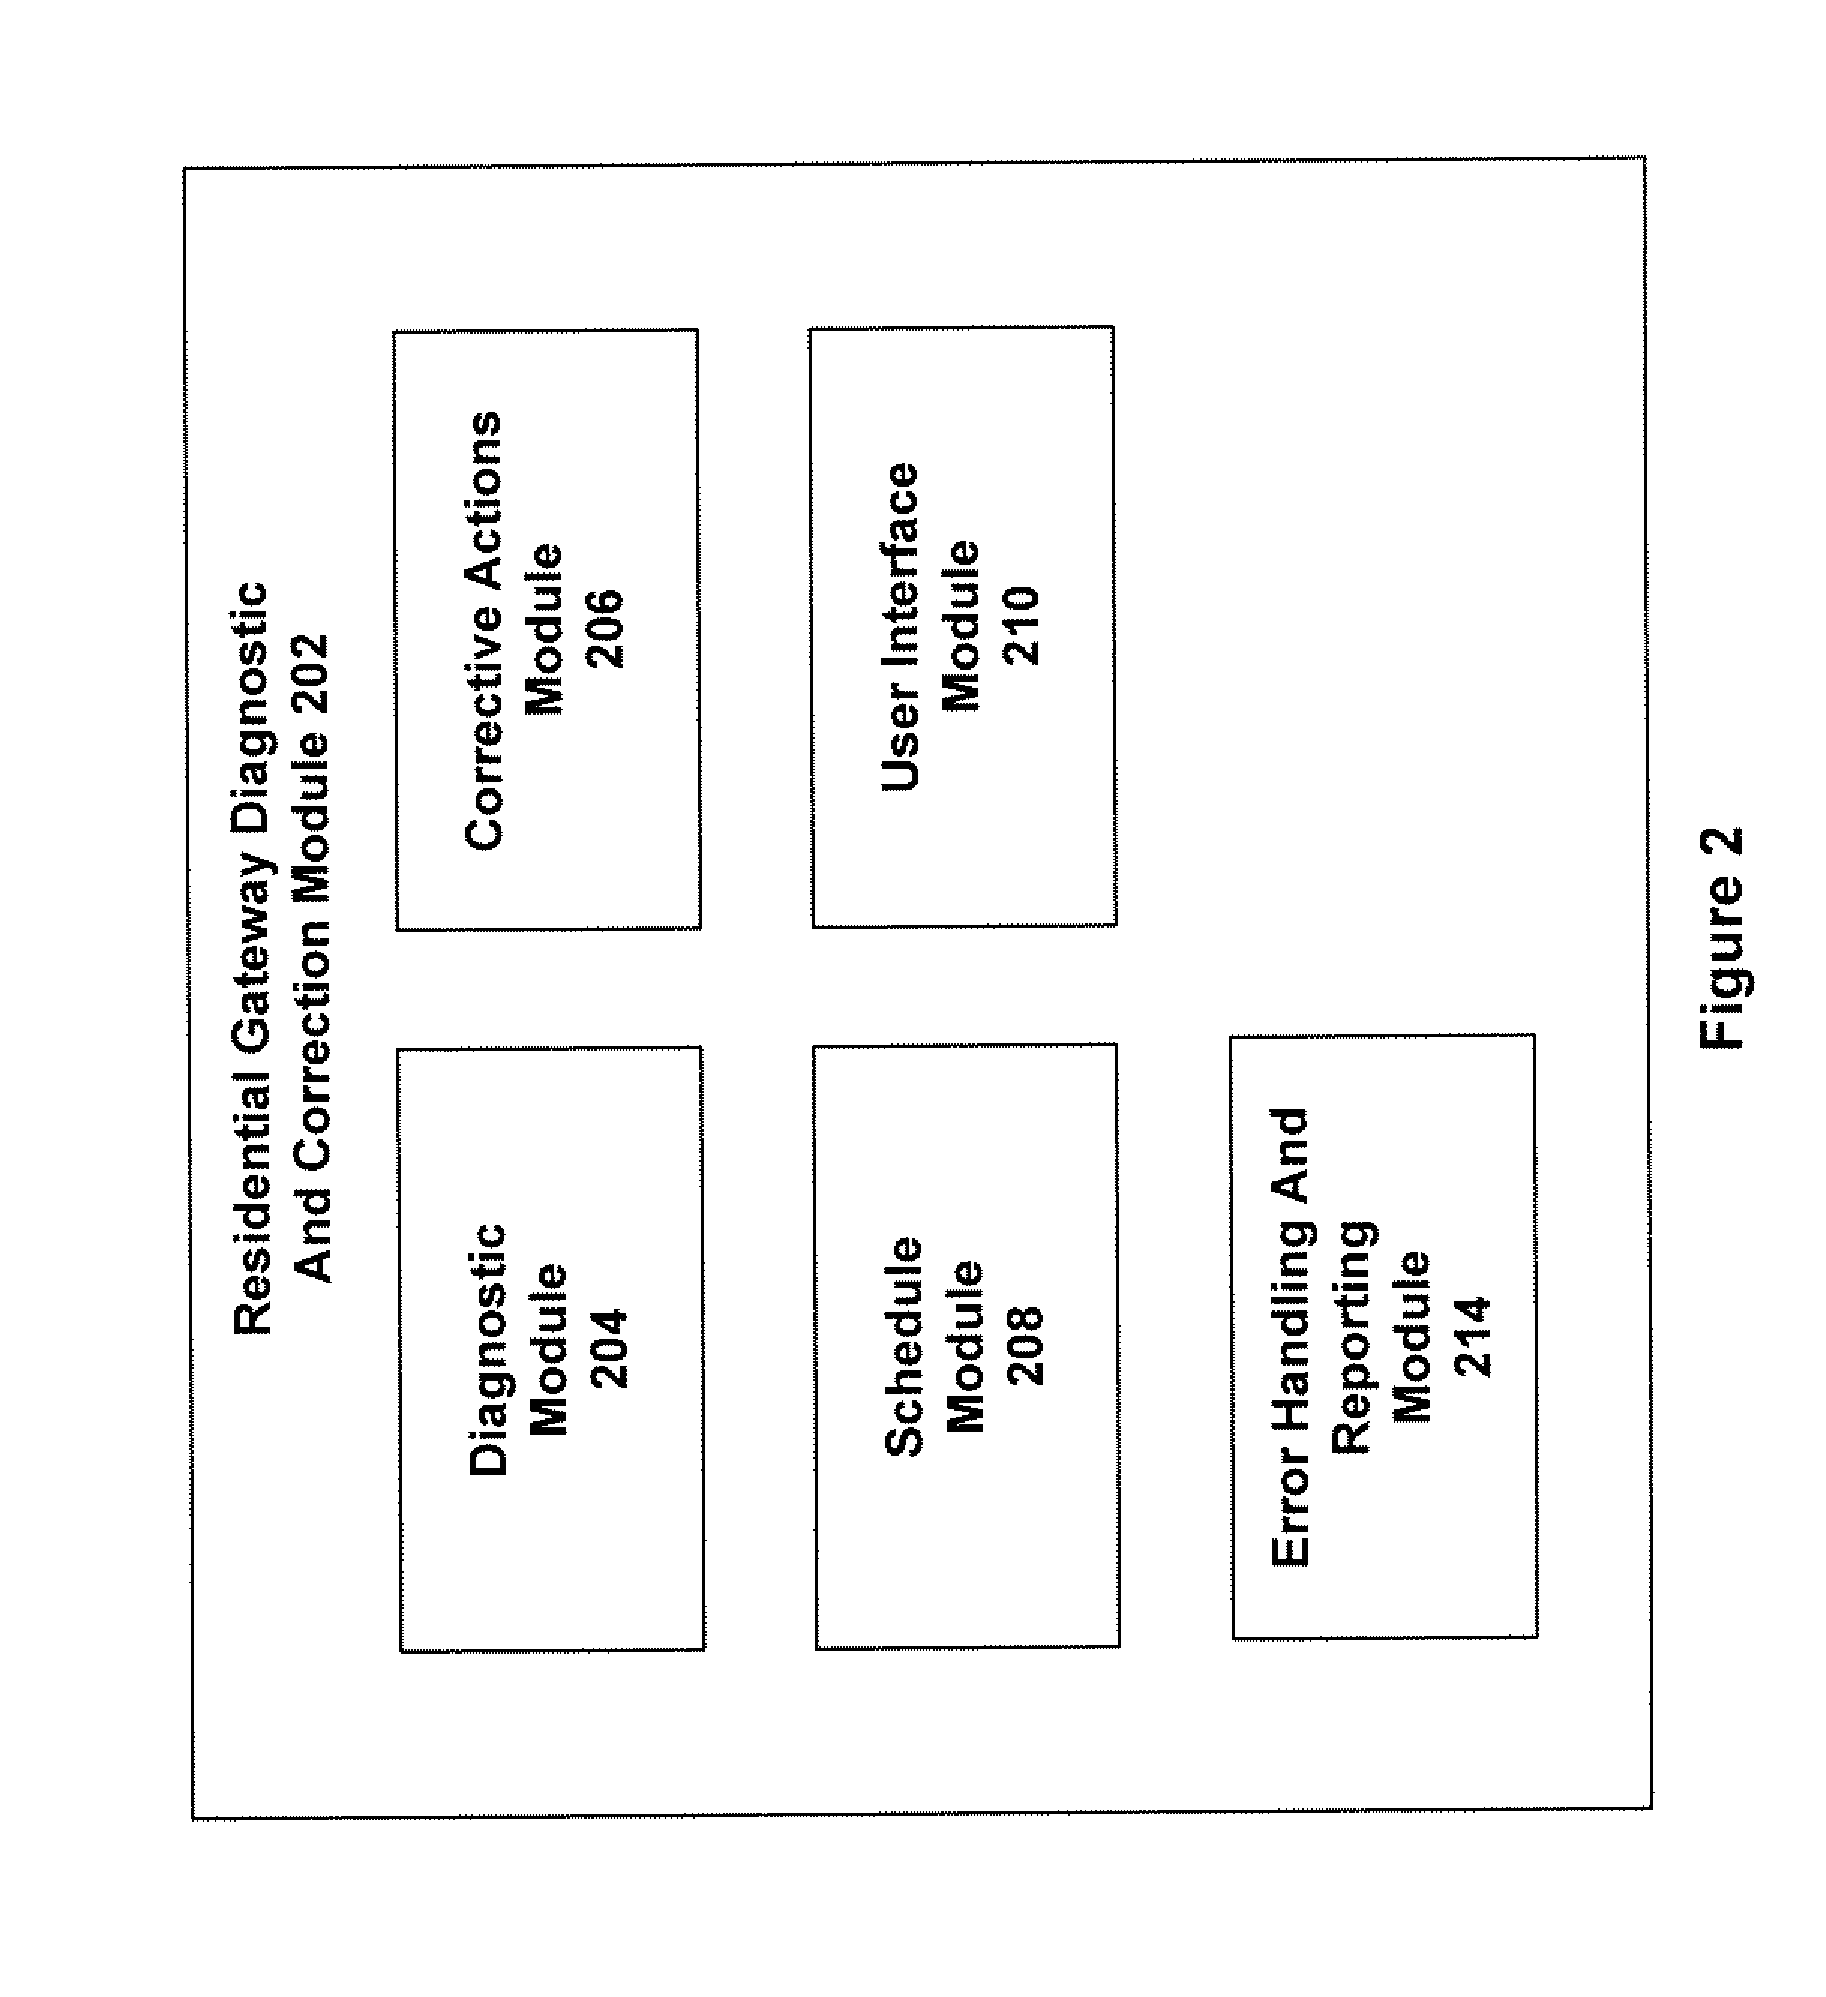 System for and method of performing residential gateway diagnostics and corrective actions